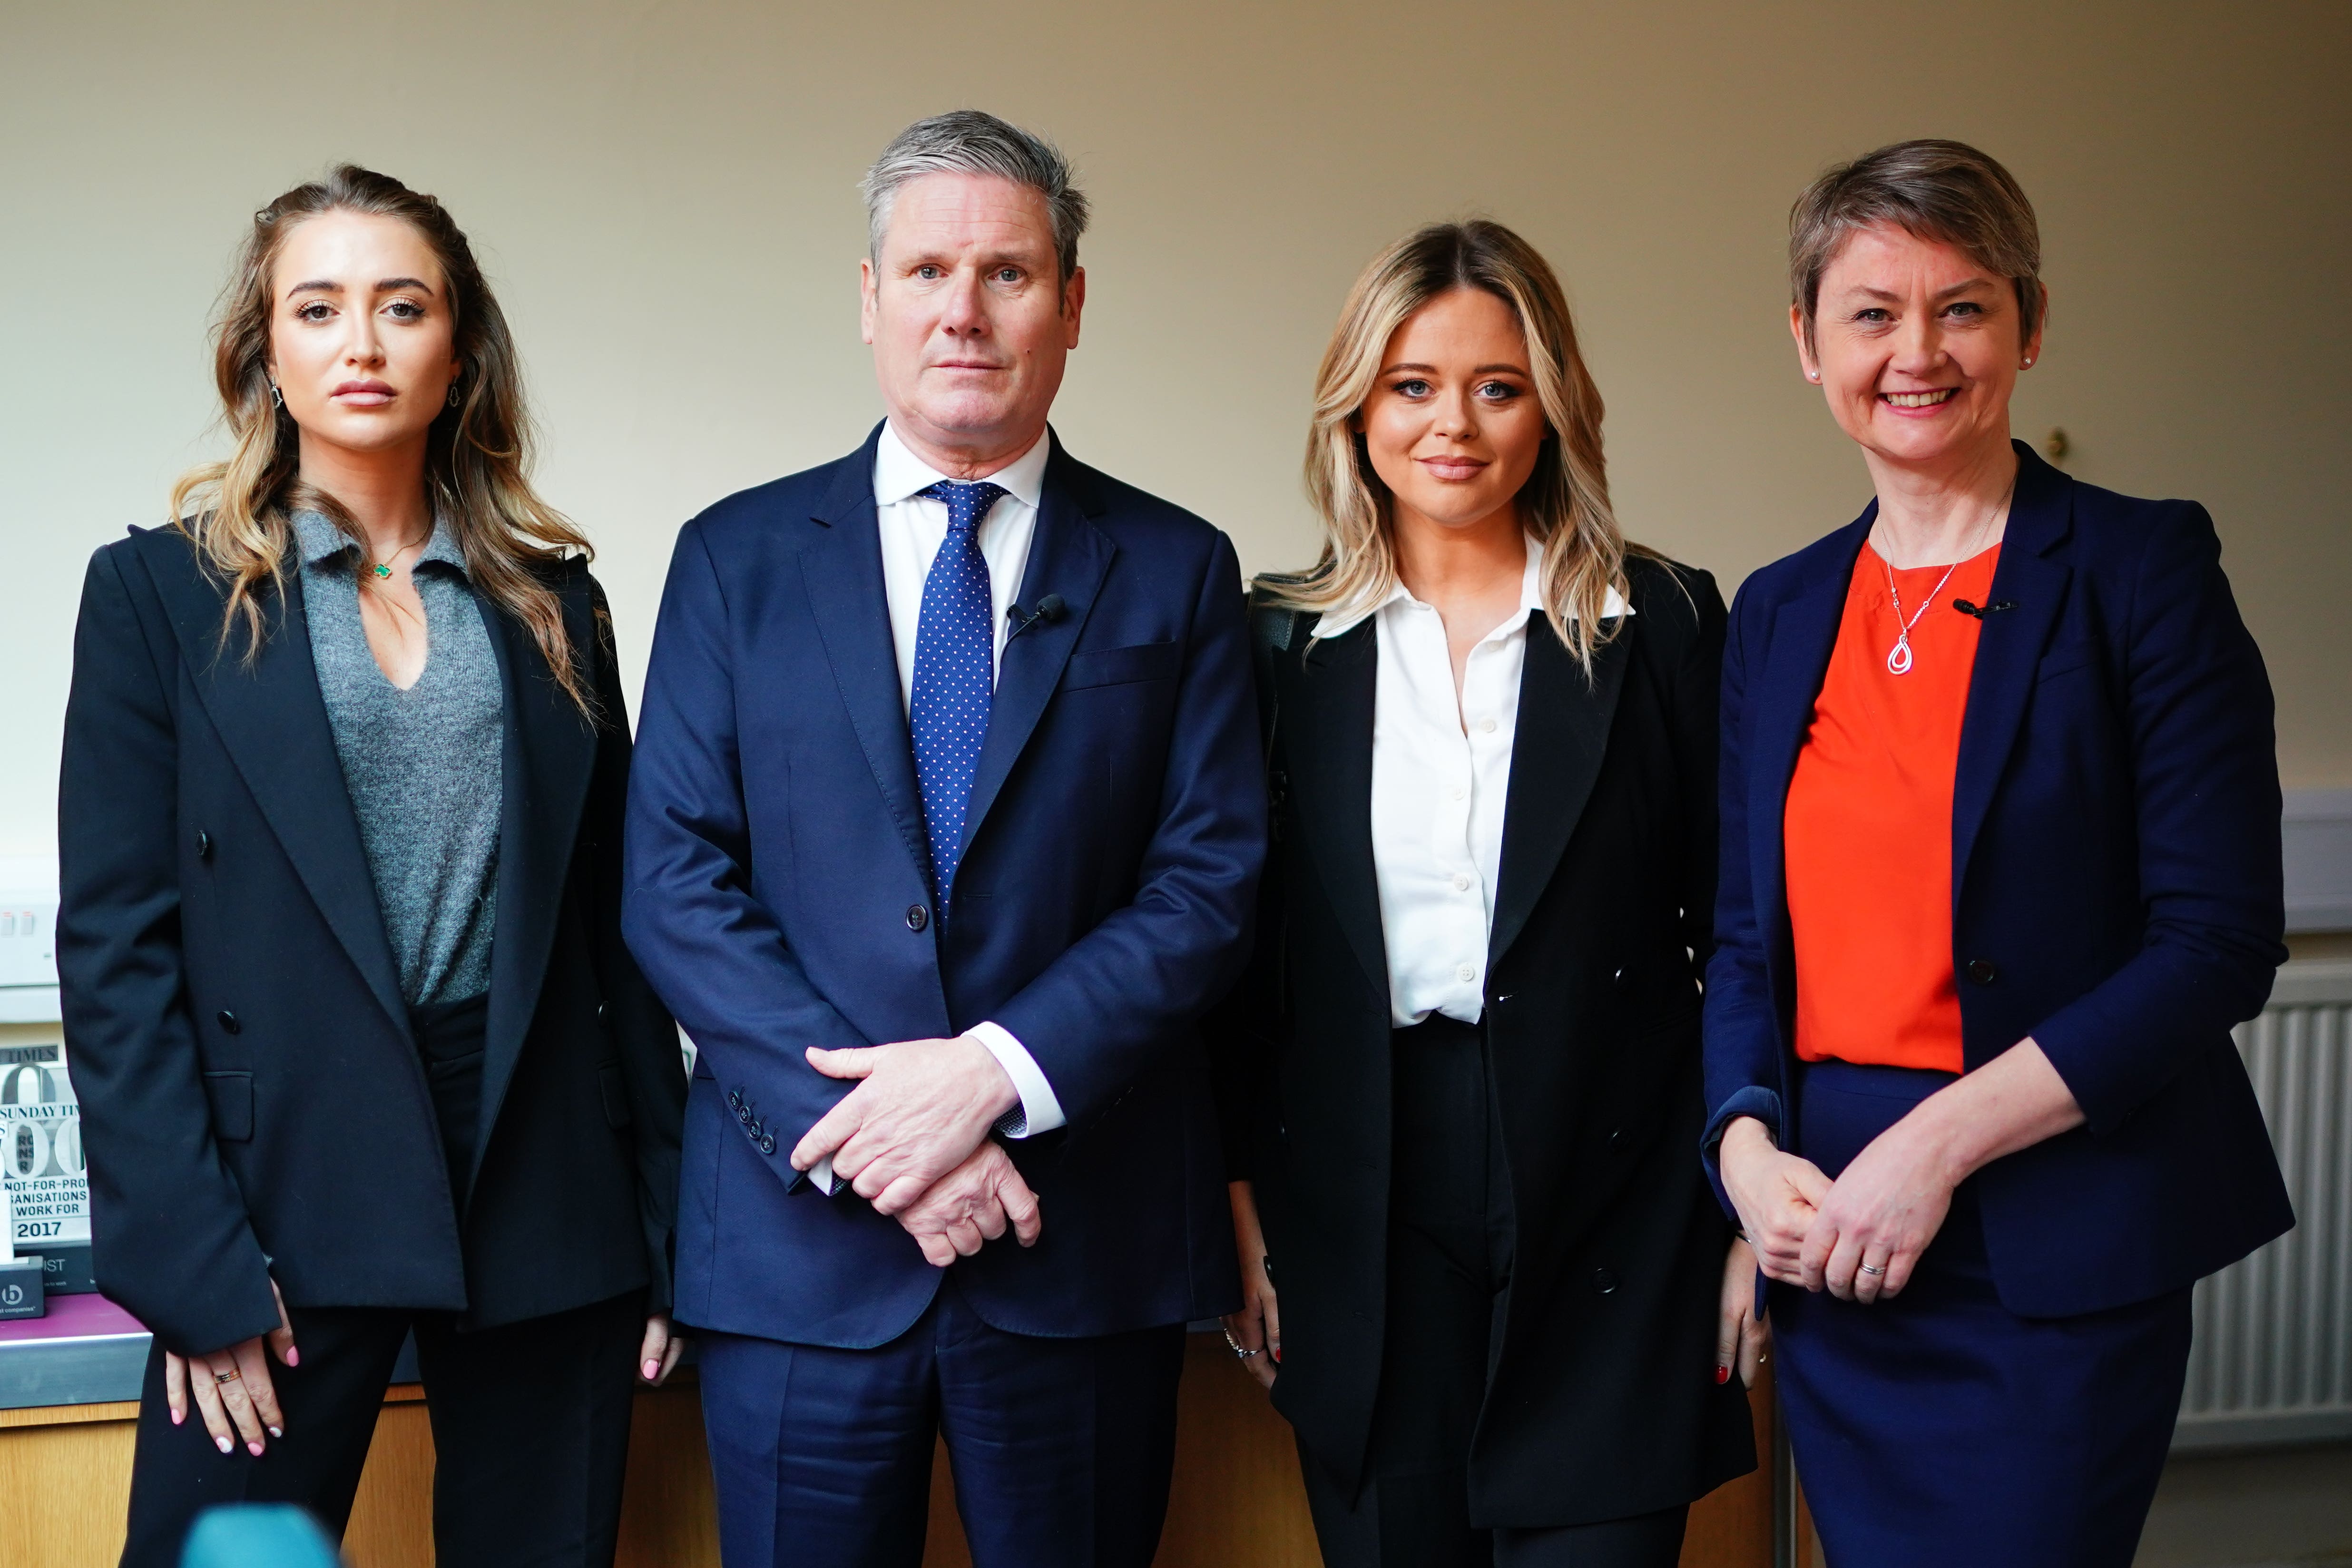 (L to R) Reality TV star Georgia Harrison, Starmer, actor Emily Atack, and shadow home secretary Yvette Cooper ahead of a roundtable discussion on tackling violence against women and girls